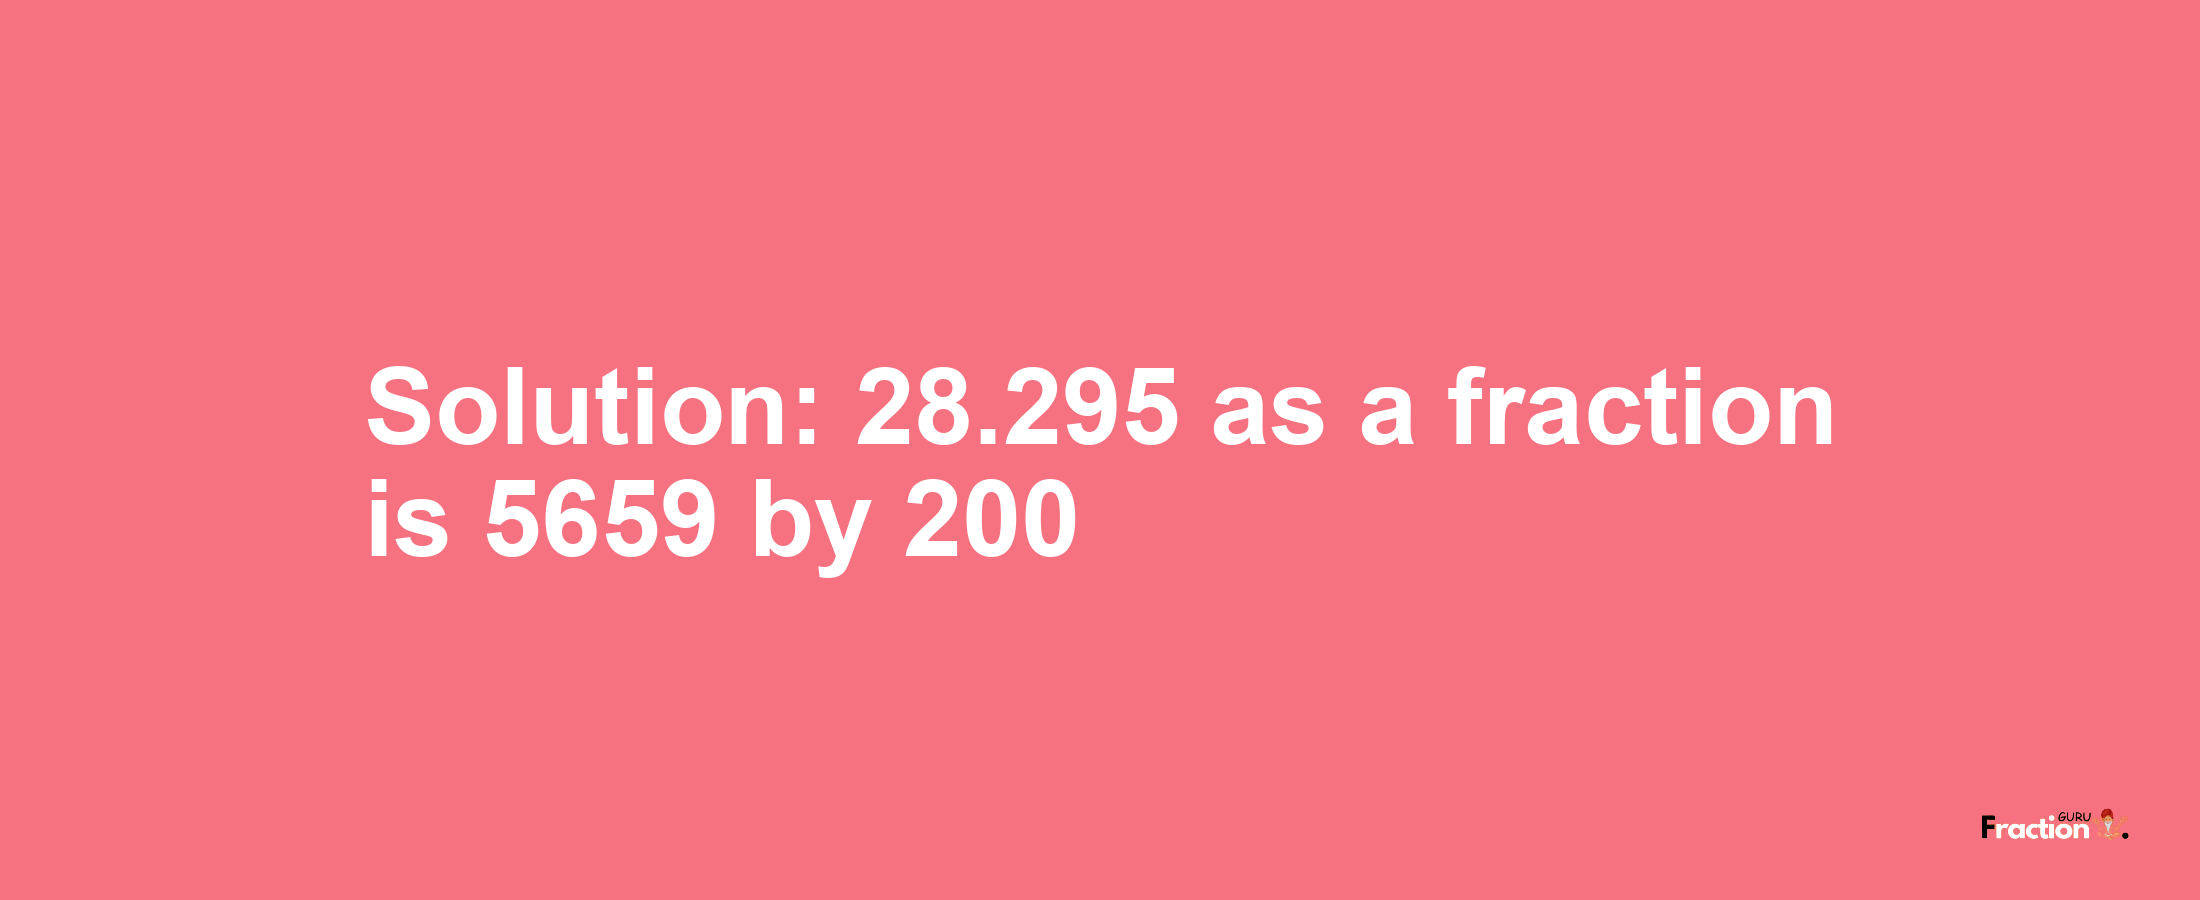 Solution:28.295 as a fraction is 5659/200